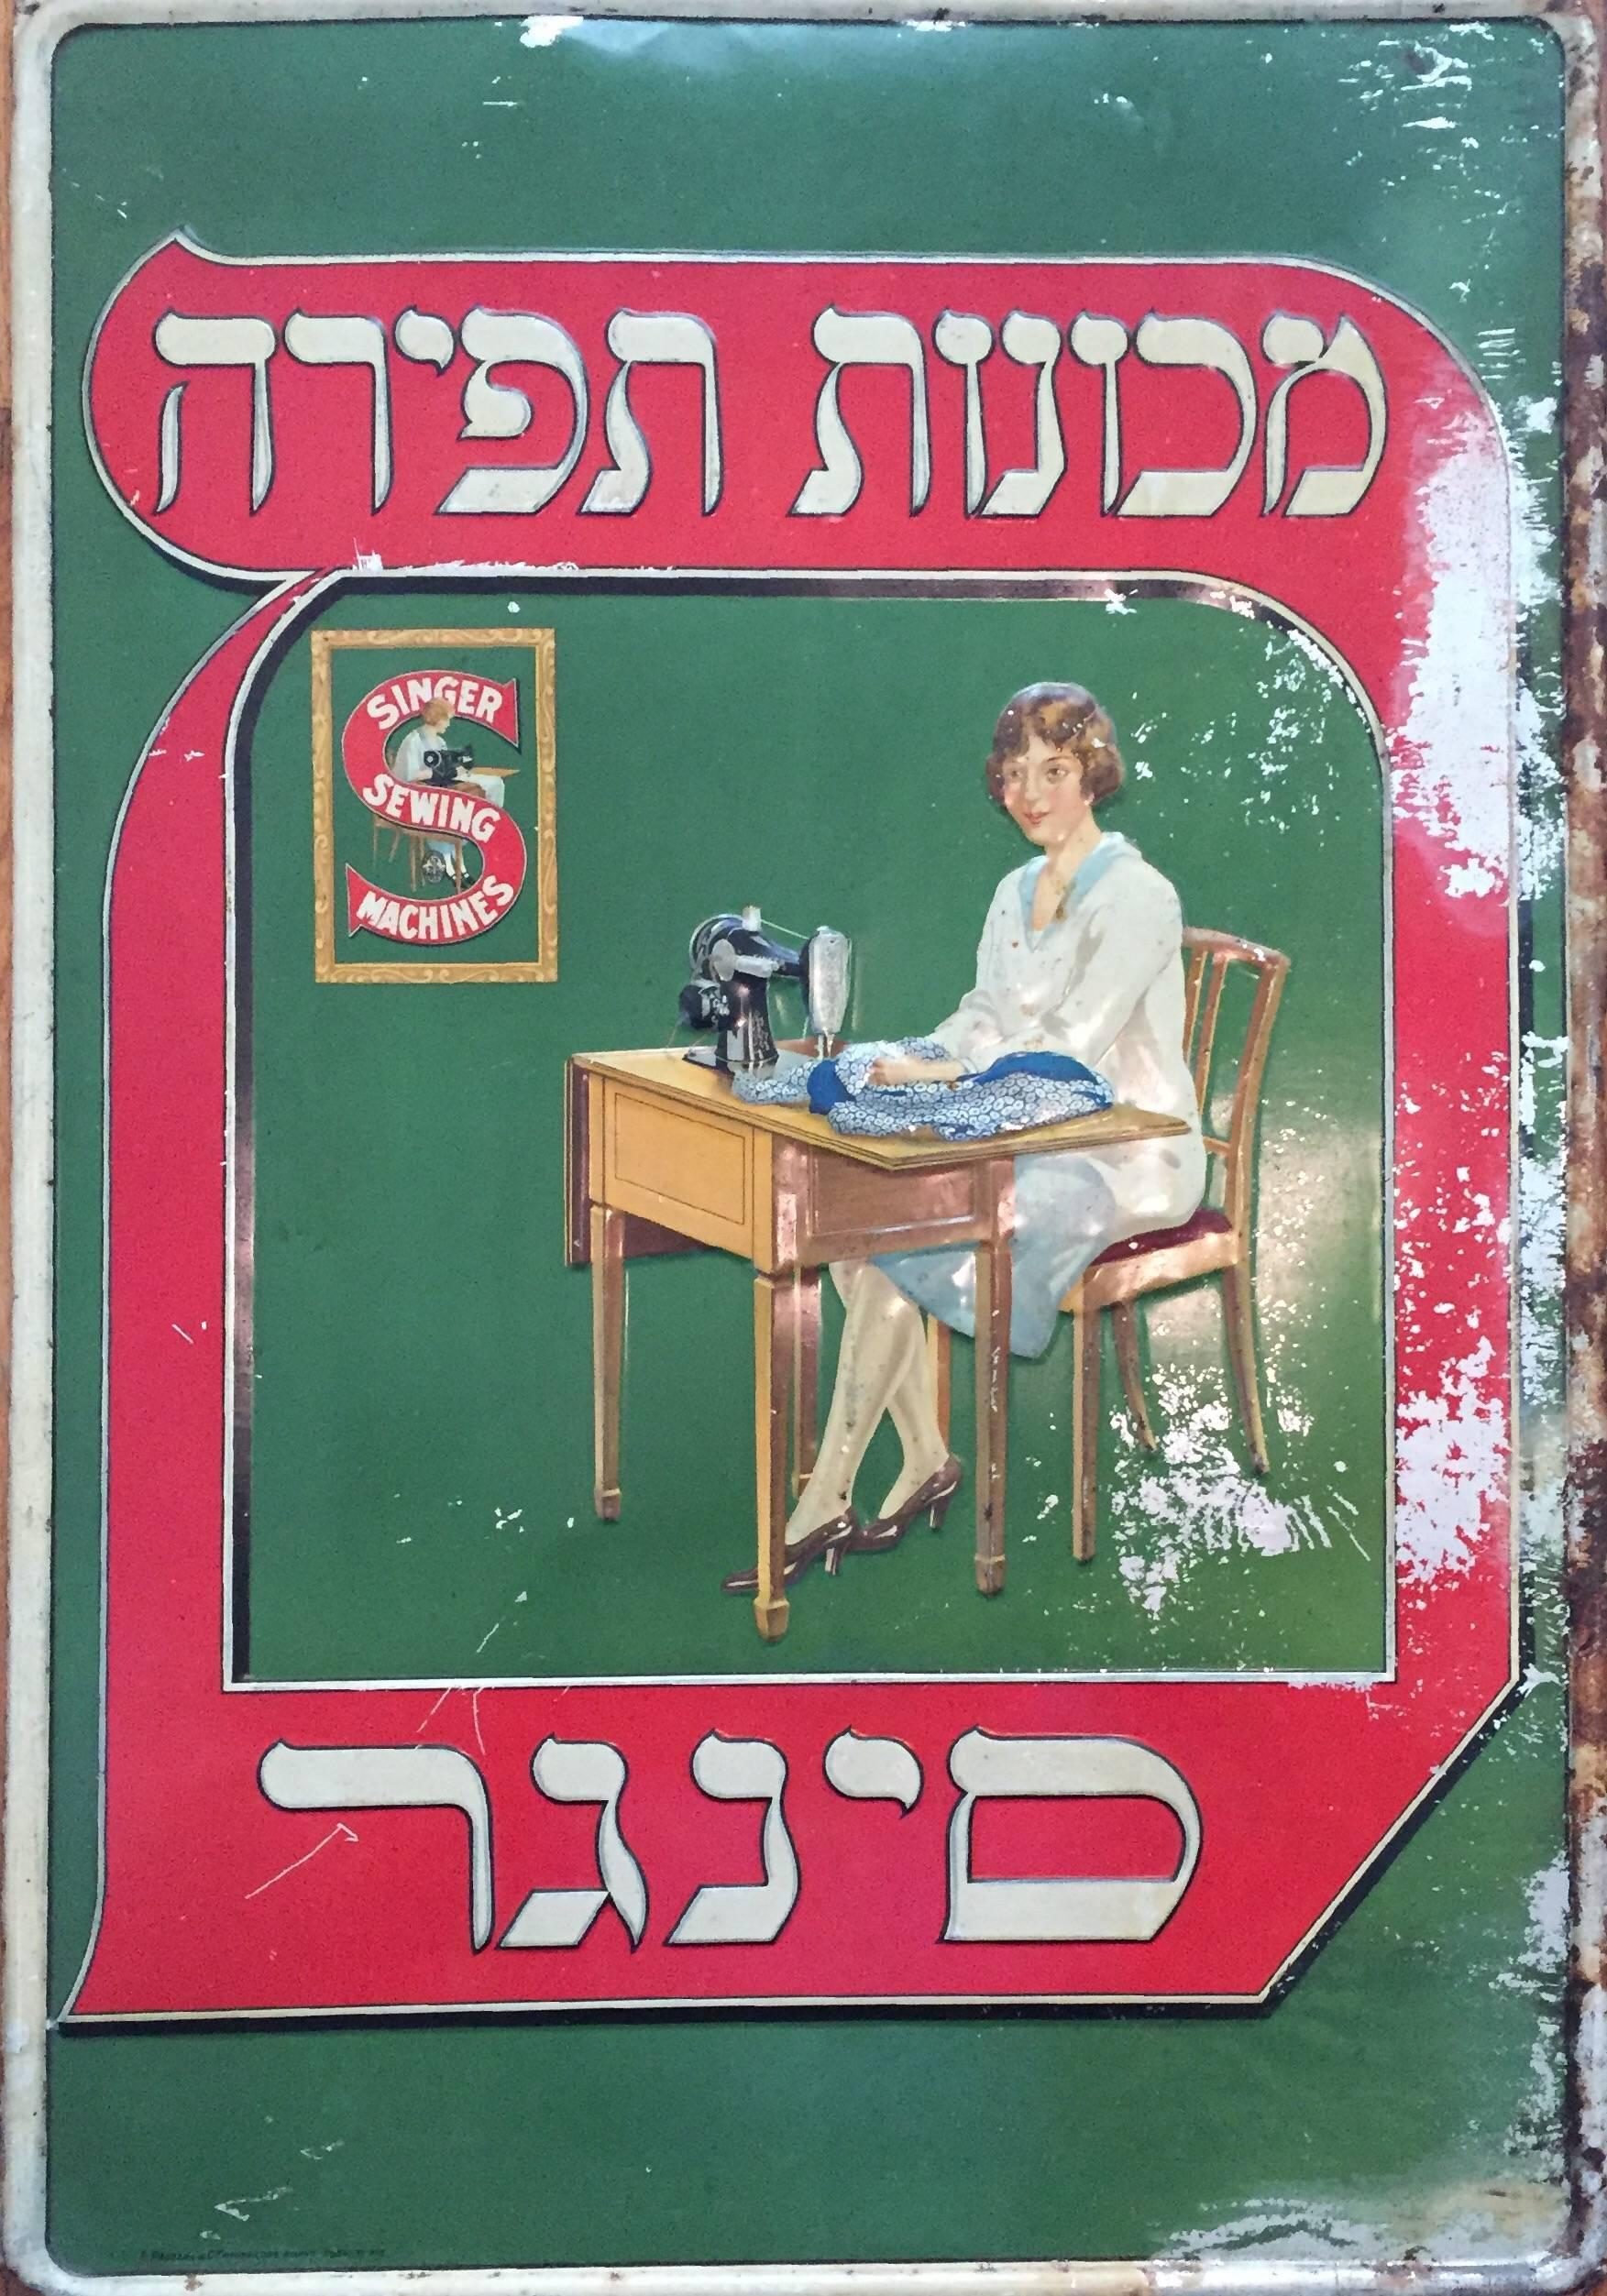 Rare antique enamel Vintage Singer Sewing Machine advertisement Sign in Hebrew or Yiddish. Please see photos for condition. Rare early Jewish advertising memorbilia

This early twentieth century metal sign is an advertisement by the Singer